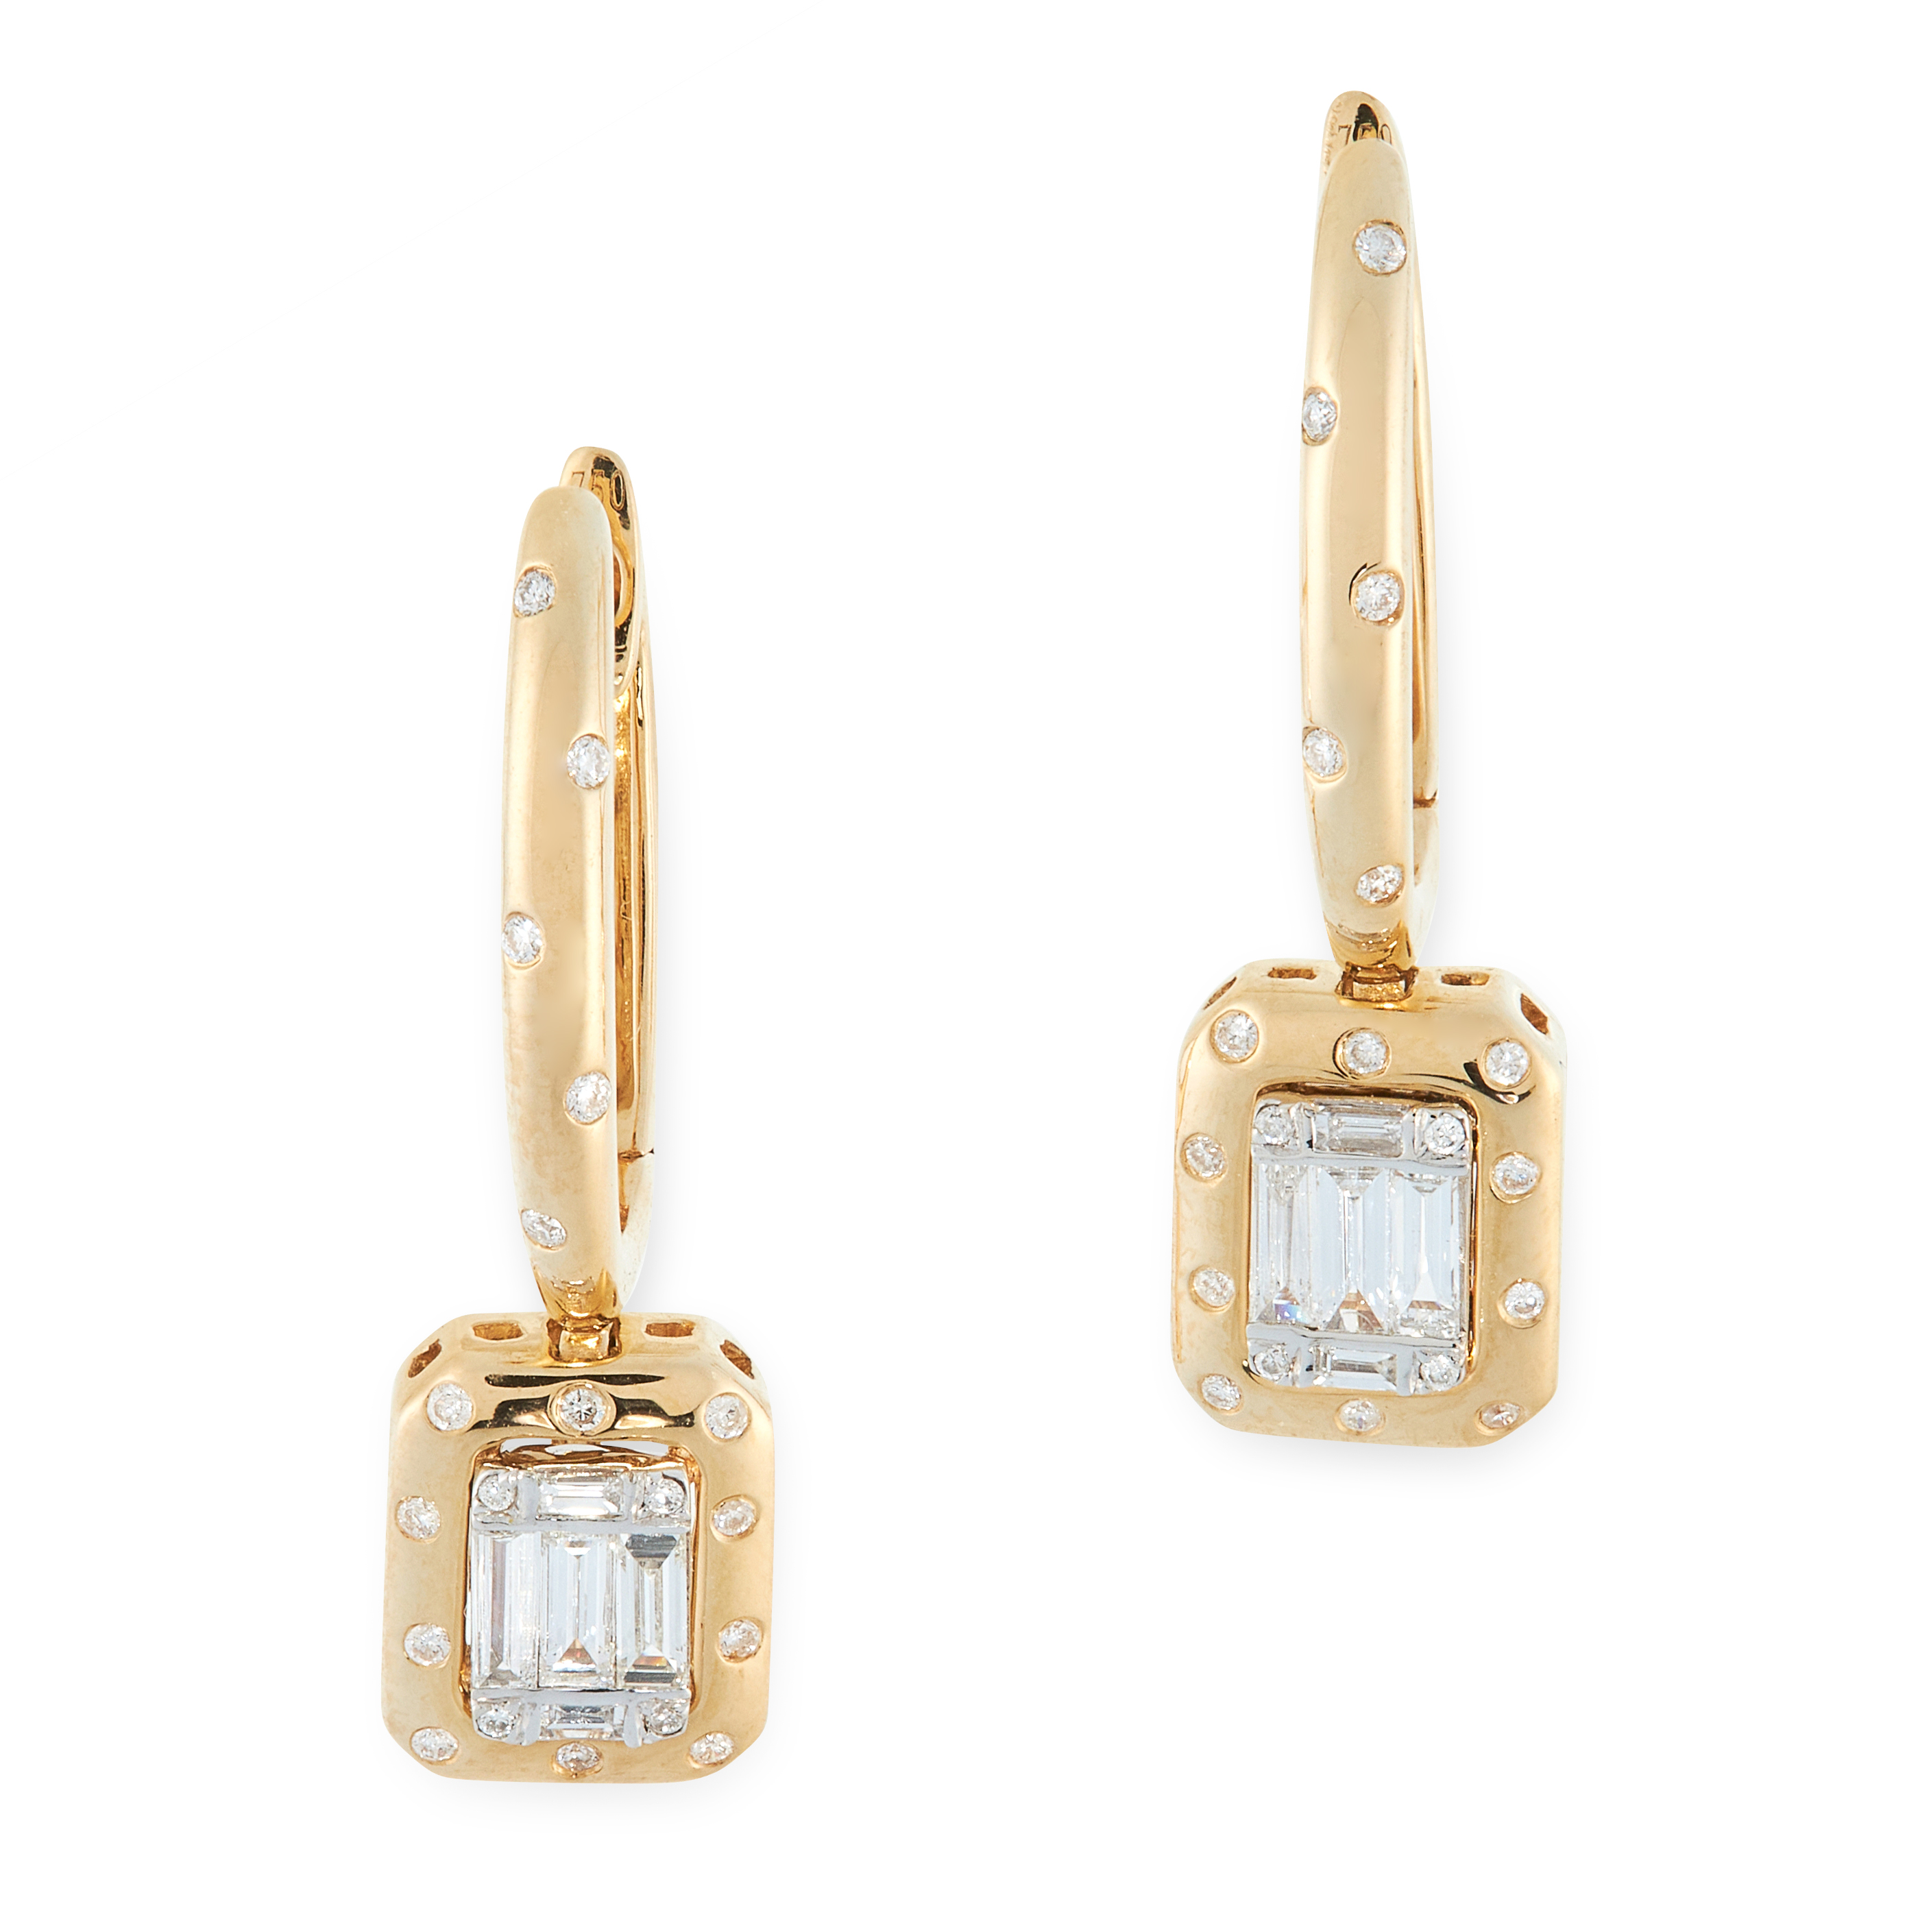 A PAIR OF DIAMOND DROP EARRINGS in 18ct yellow gold, each formed of a hoop jewelled with round cut